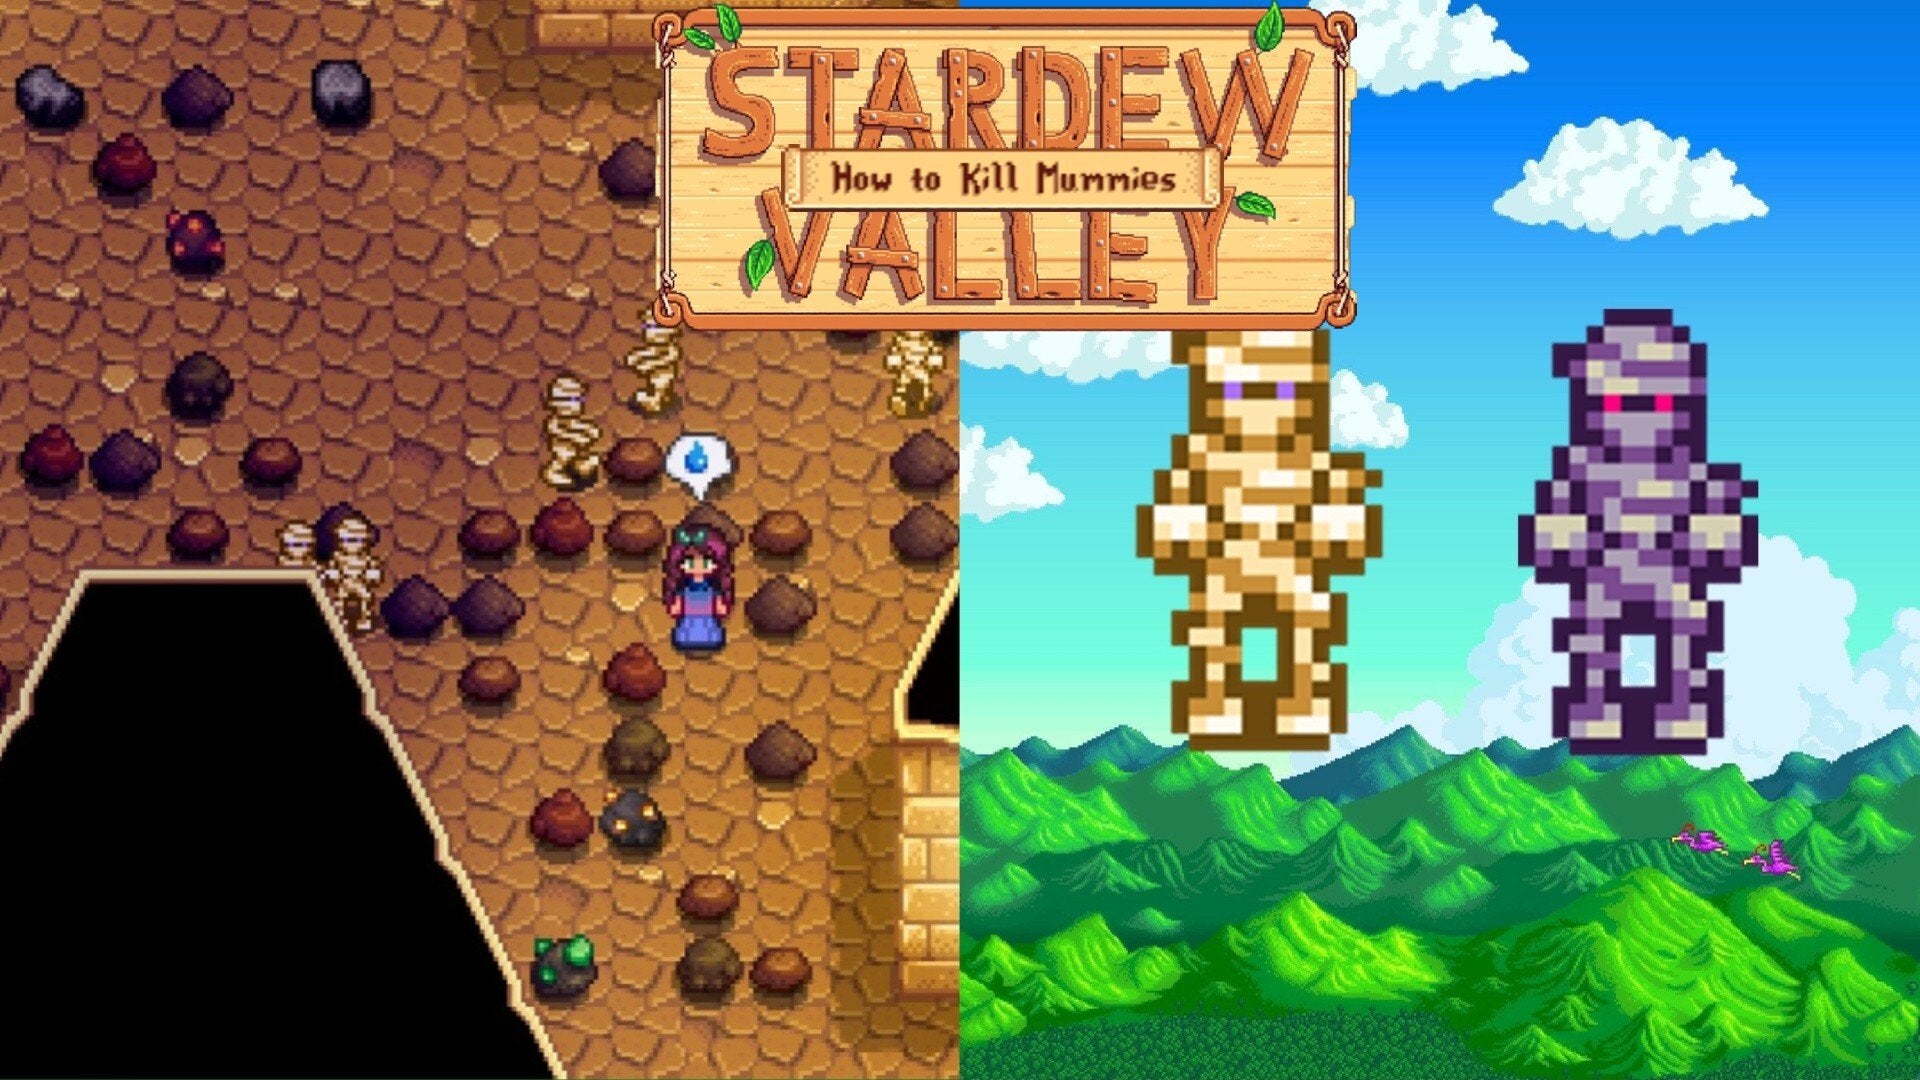 A player finding a mummy in a cave in Stardew Valley.